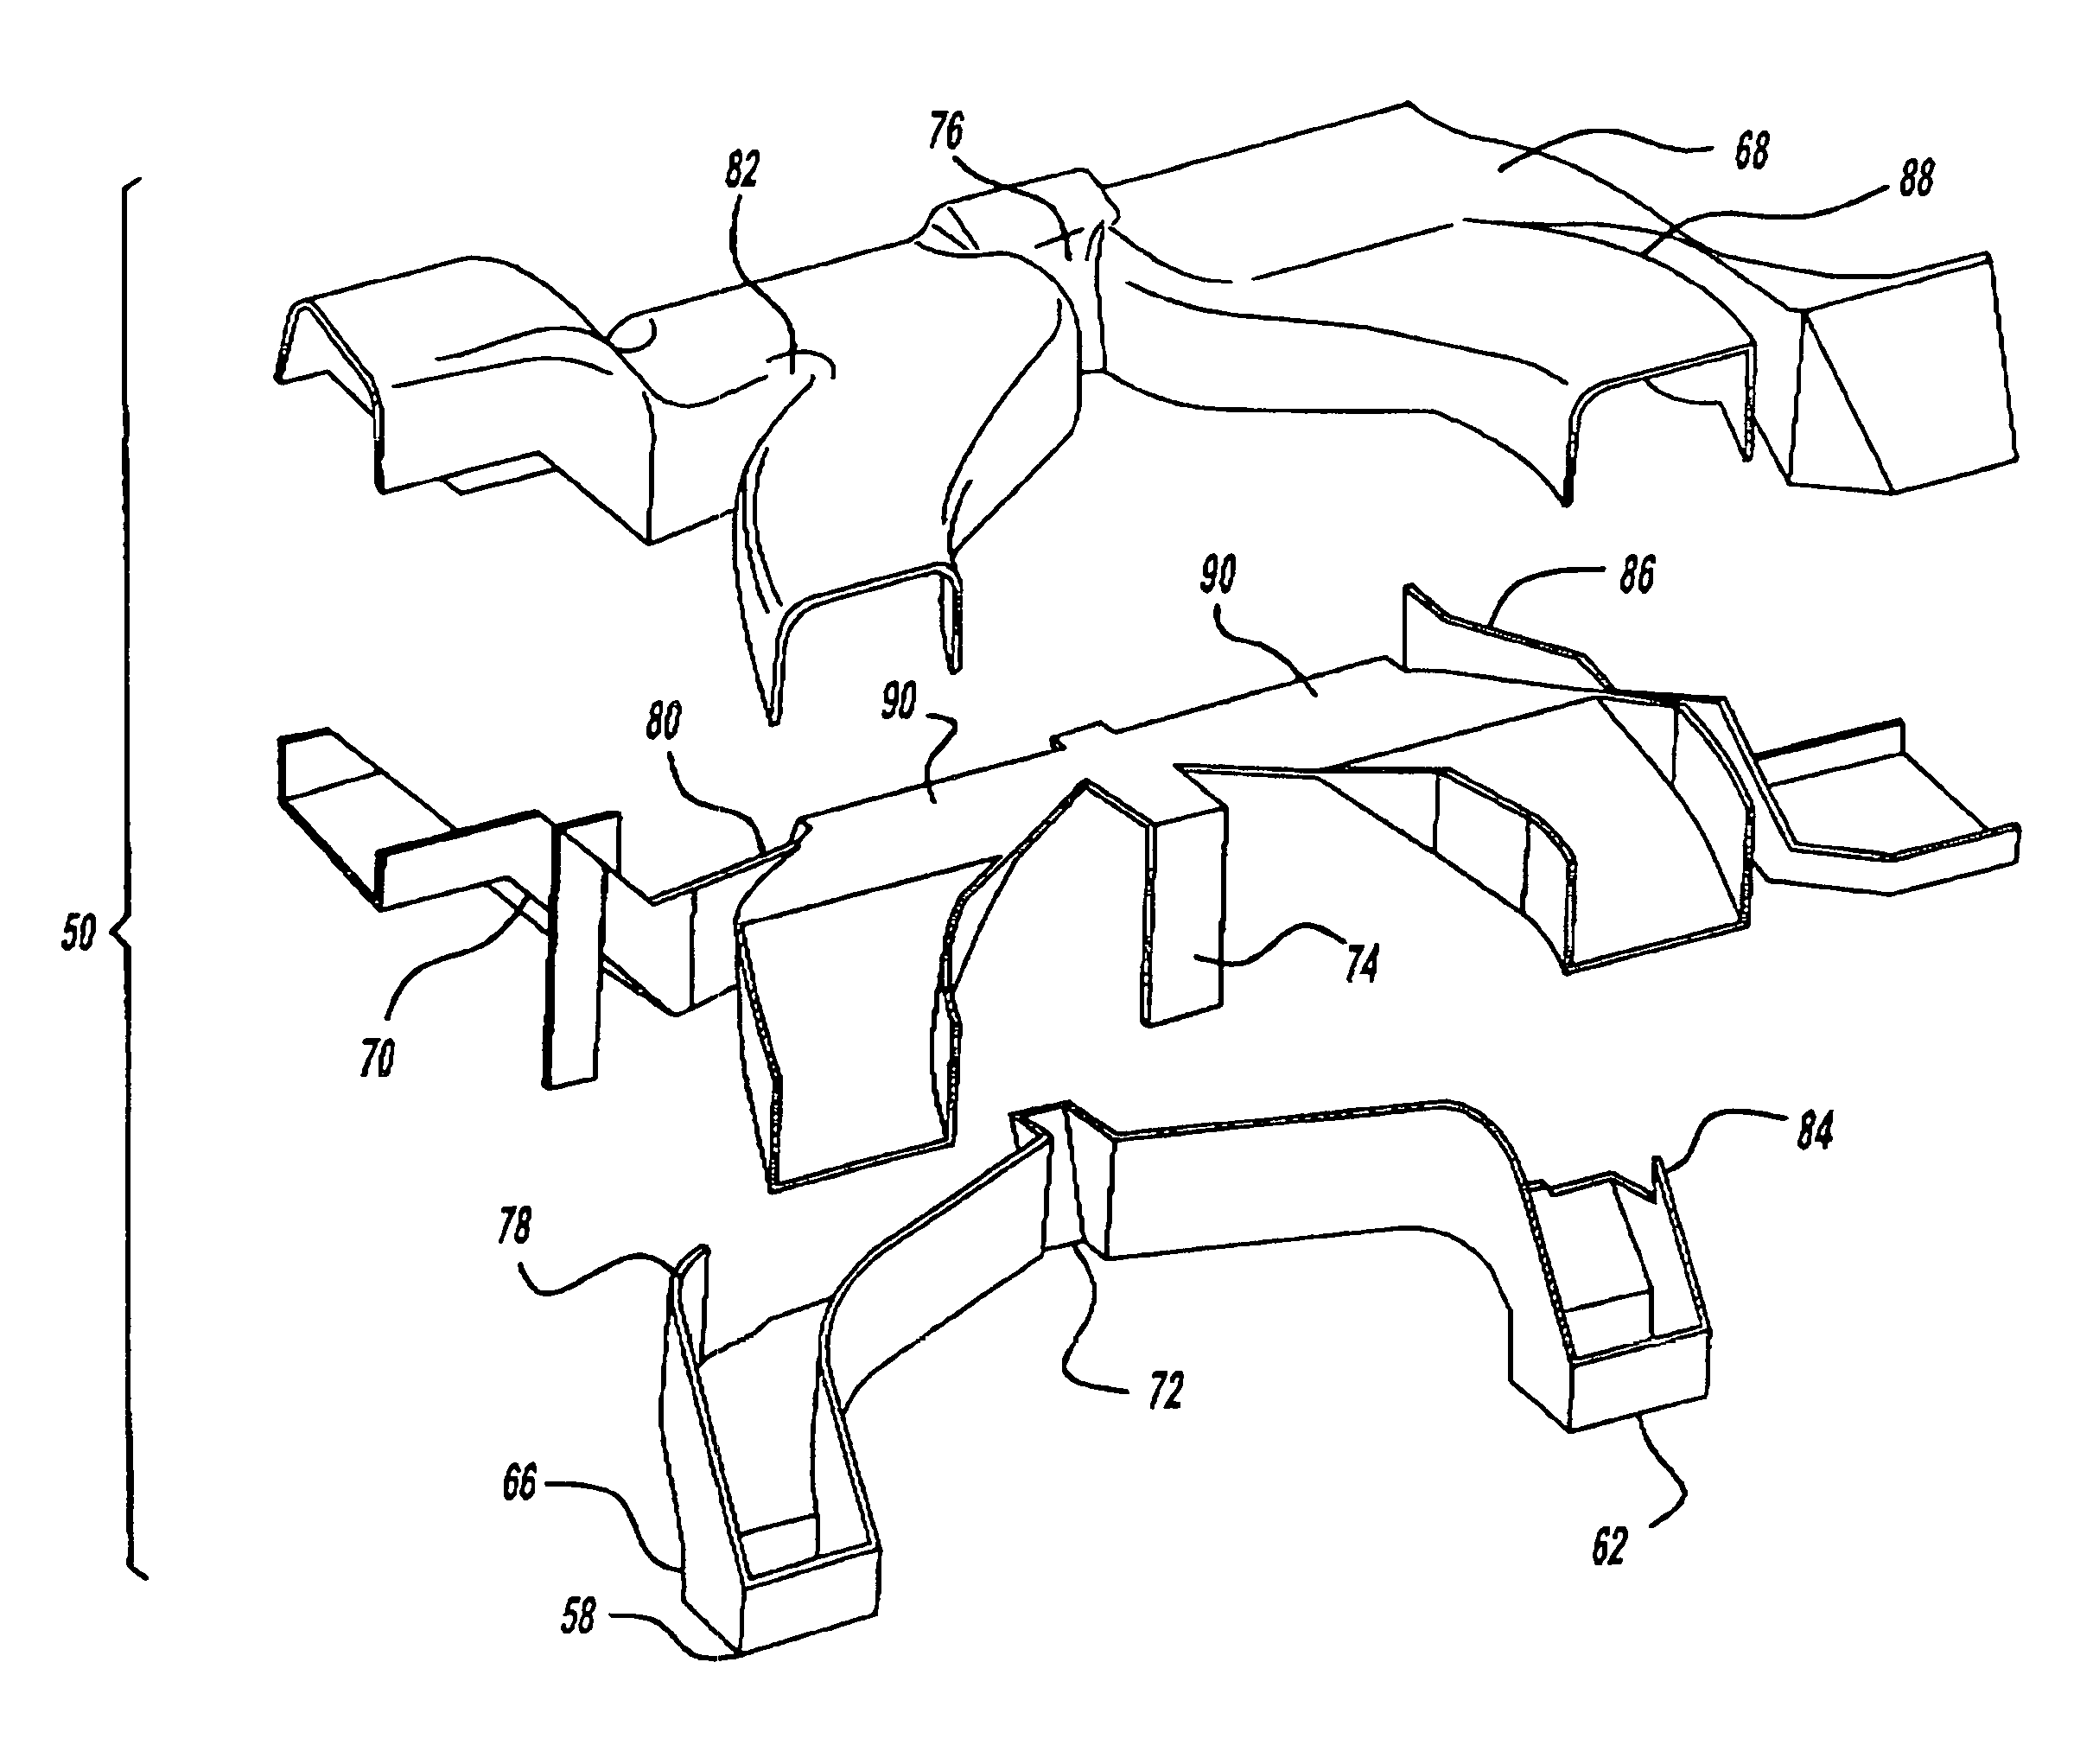 Climate control duct architecture for a vehicle